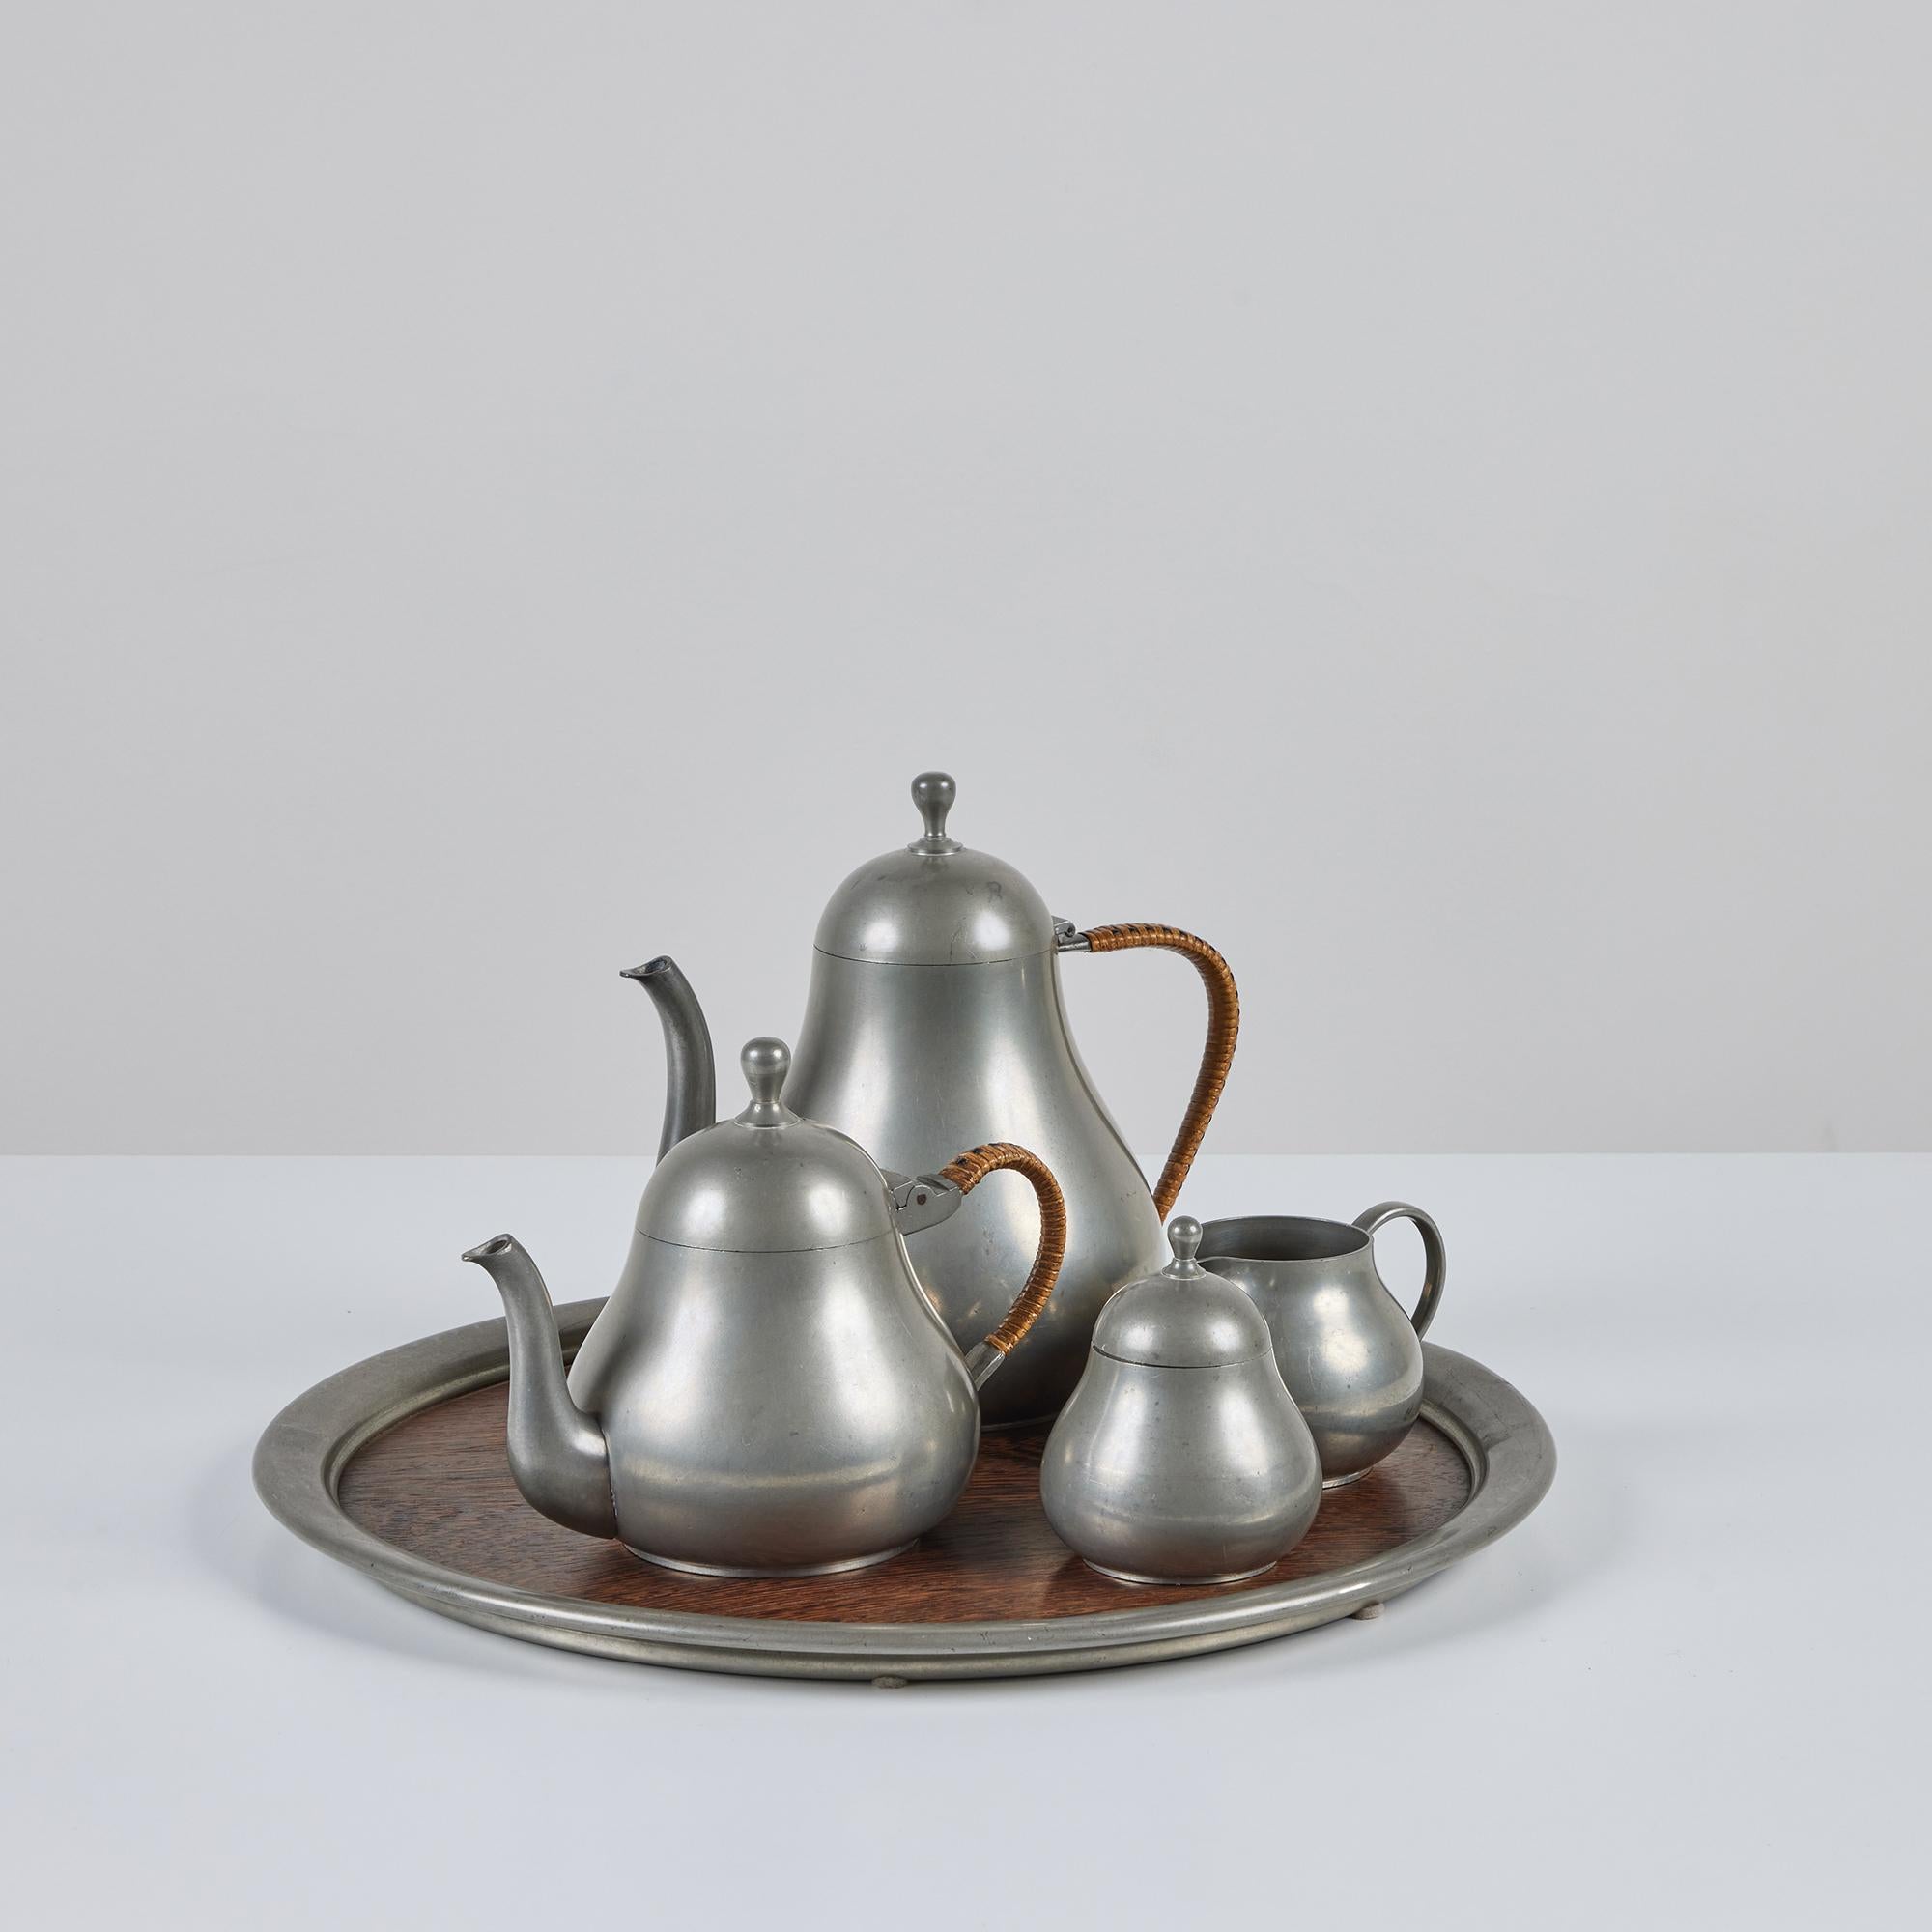 Meeuws & Zoon Den Haag five-piece service set in pewter with woven handles on both the coffee and tea pot. This Netherlands pewter set consists of one lidded coffee pot, one lidded tea pot, one creamer, one lidded sugar vessel, and a serving tray.